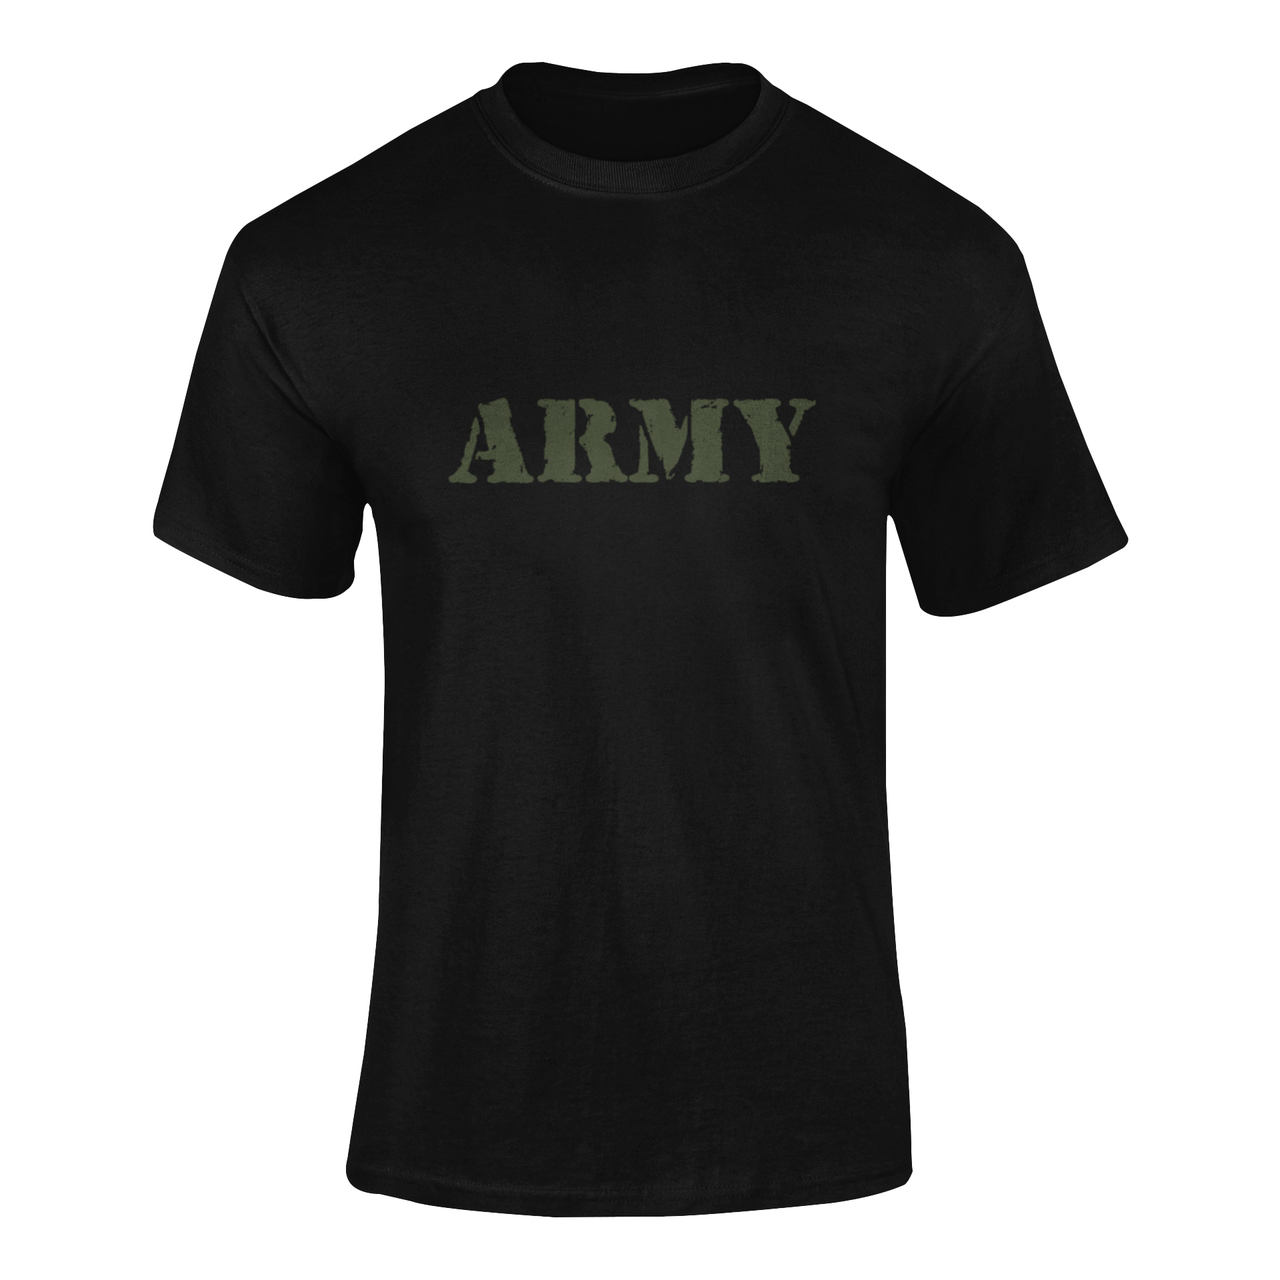 General Army Soldier E Sports Logo